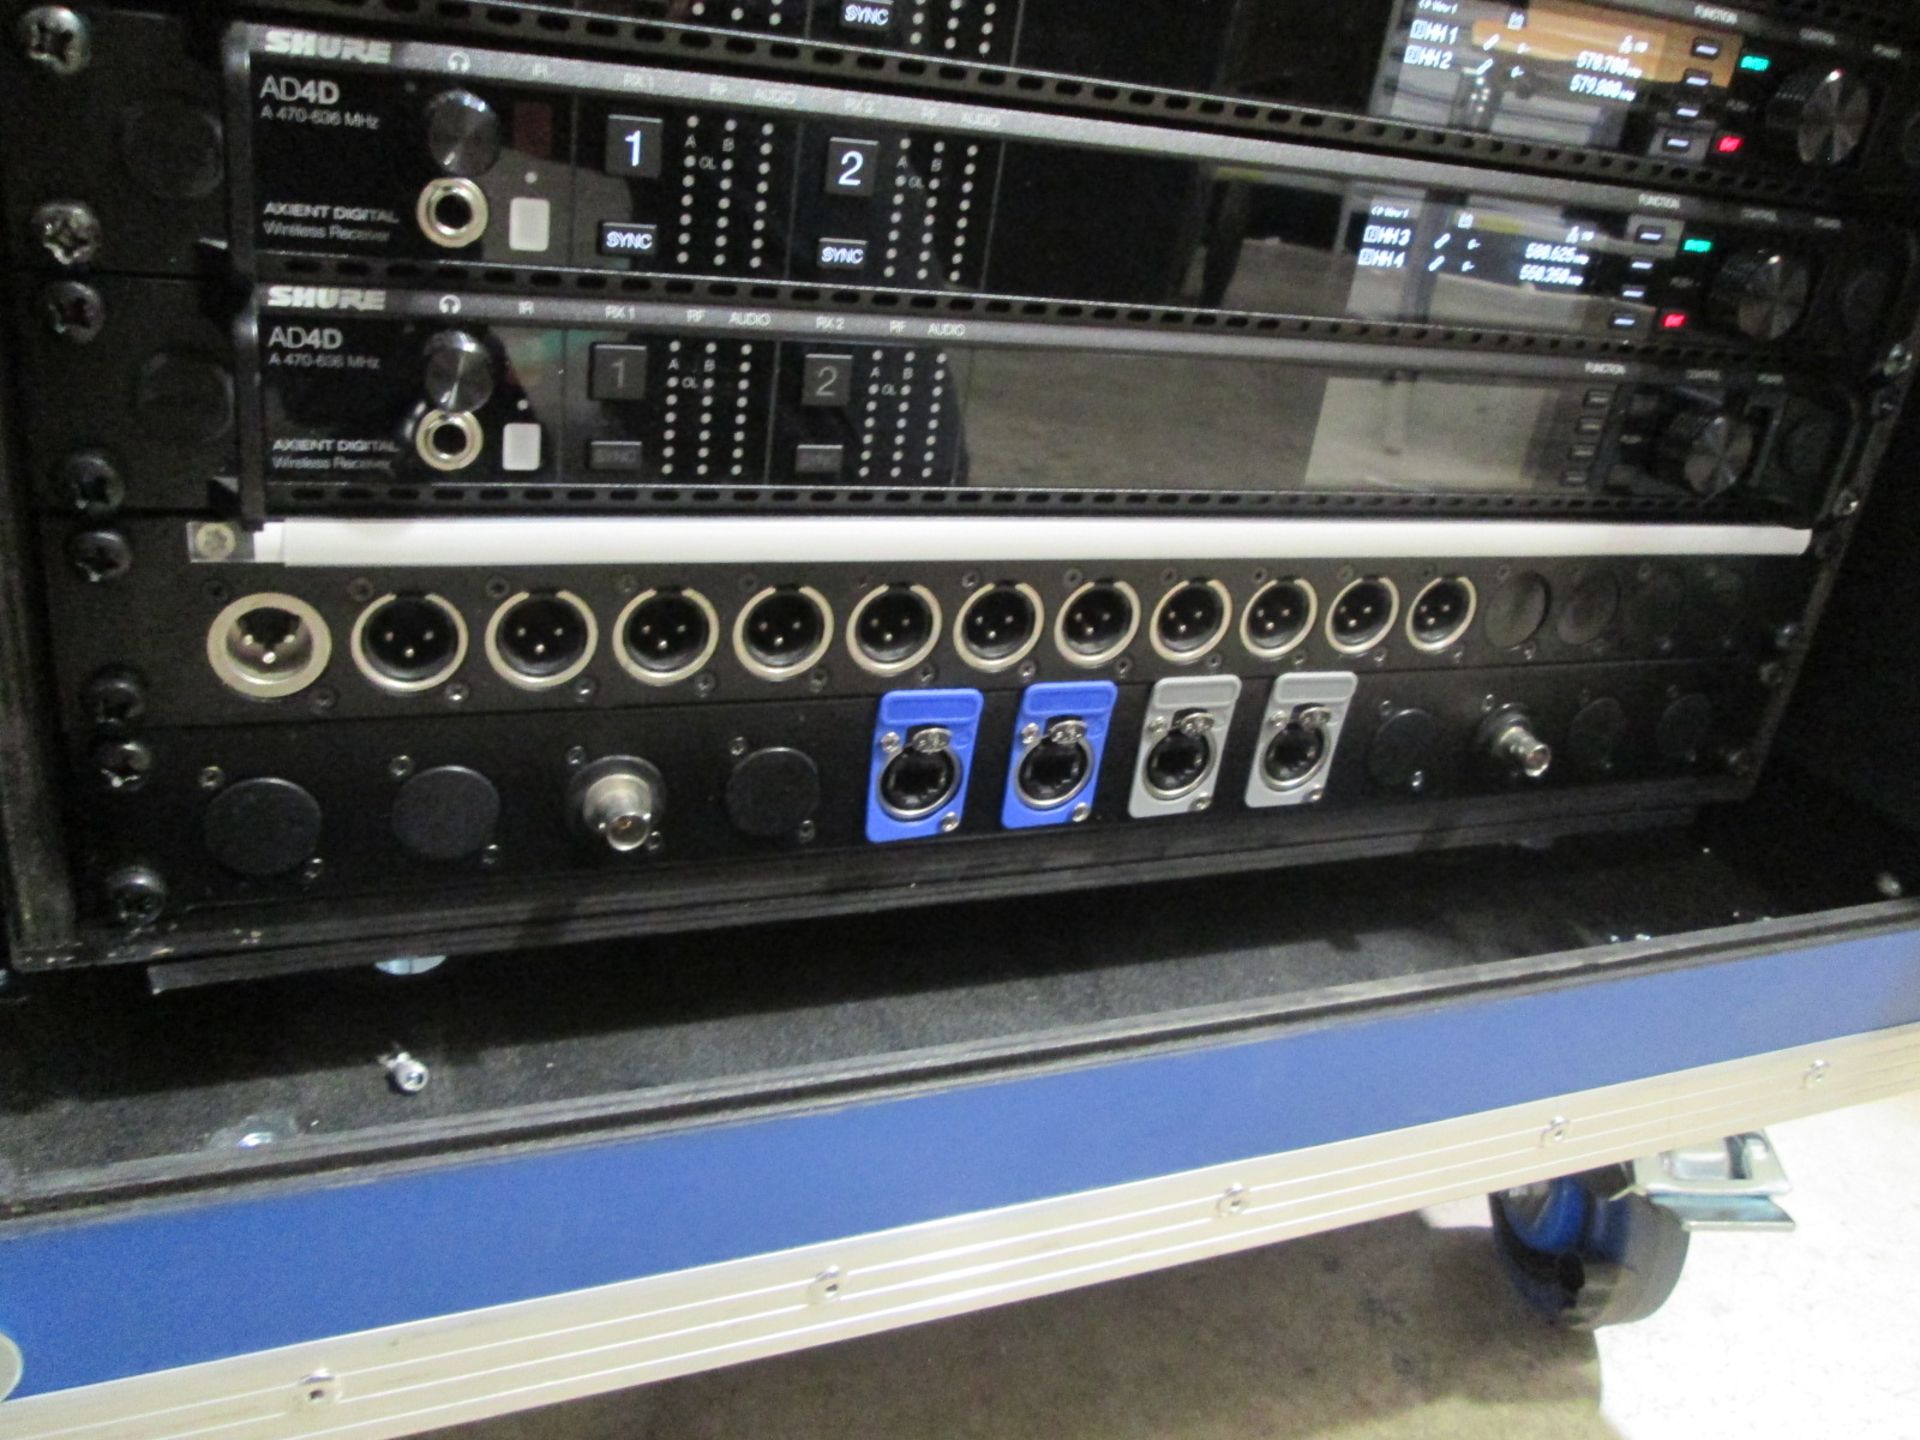 Shure Axiant Digital Radio Rack. To include 4 x AD4D 2 channel digital receivers (470.636 MHz), 4 - Image 6 of 14